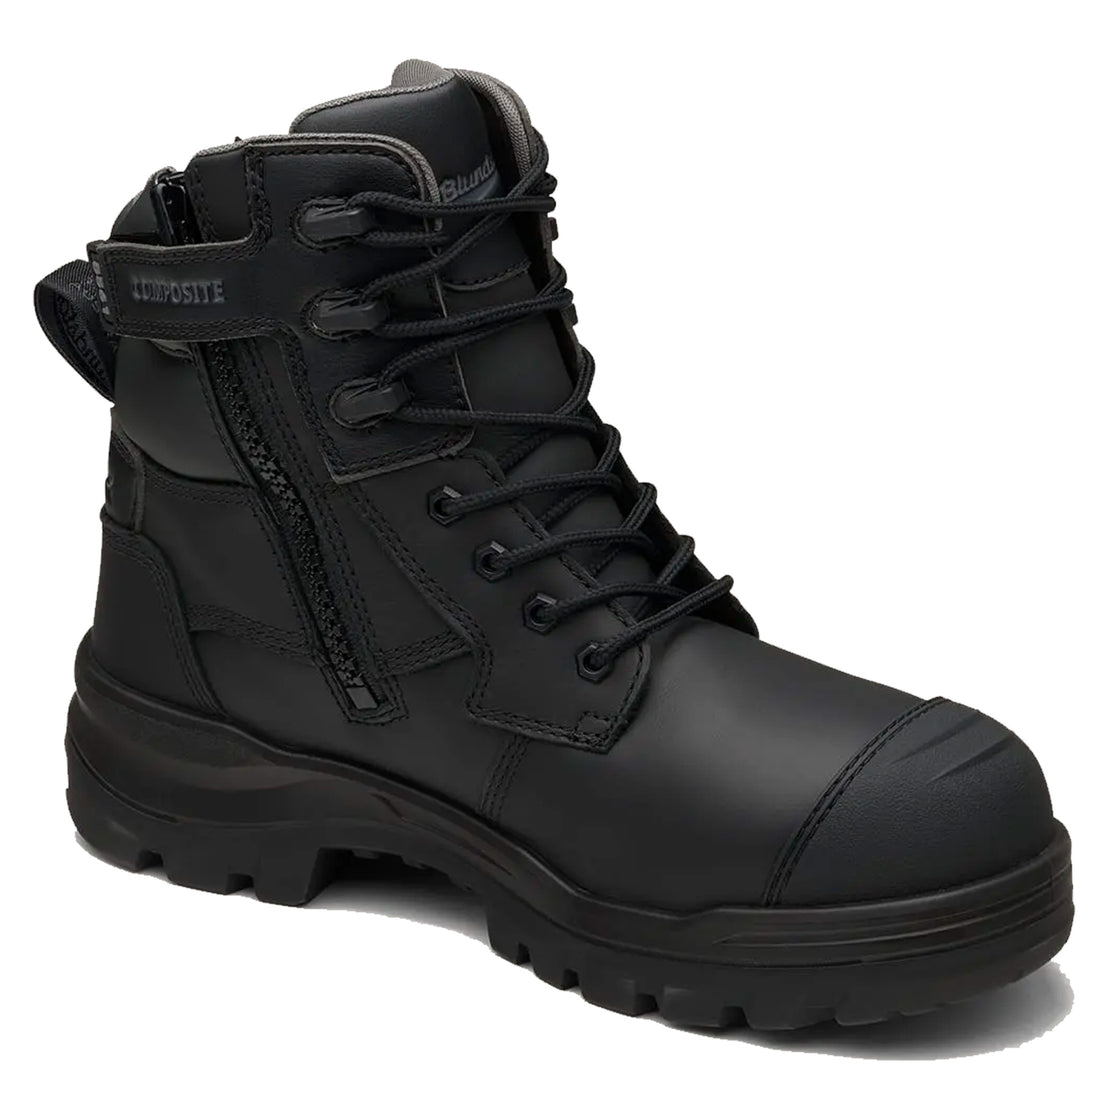 Workboots and Shoes | Tradies Workwear and Safety